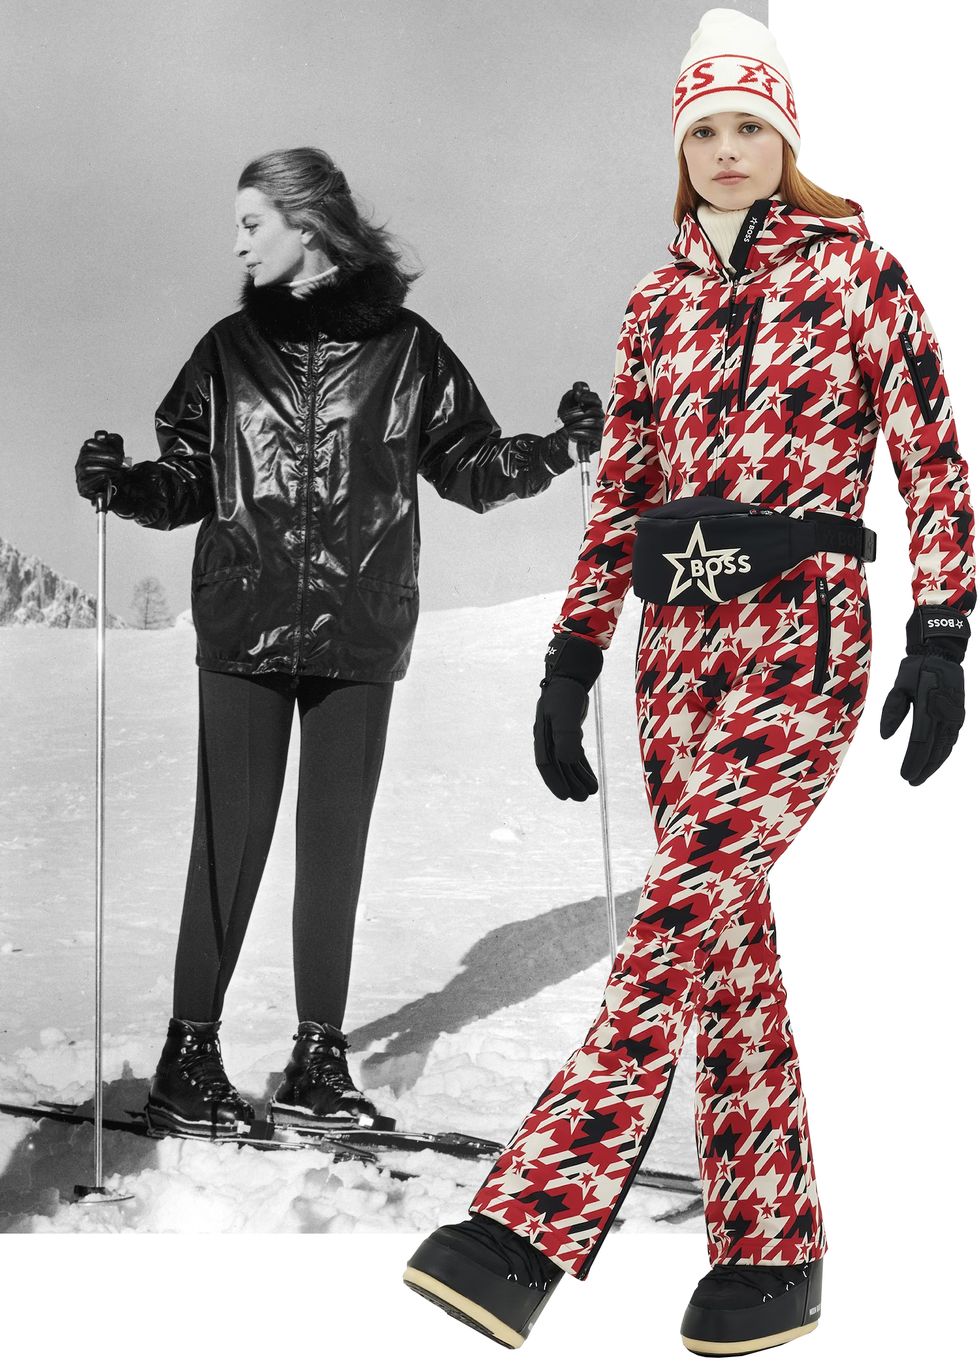 Ski Party Outfit, 43% OFF